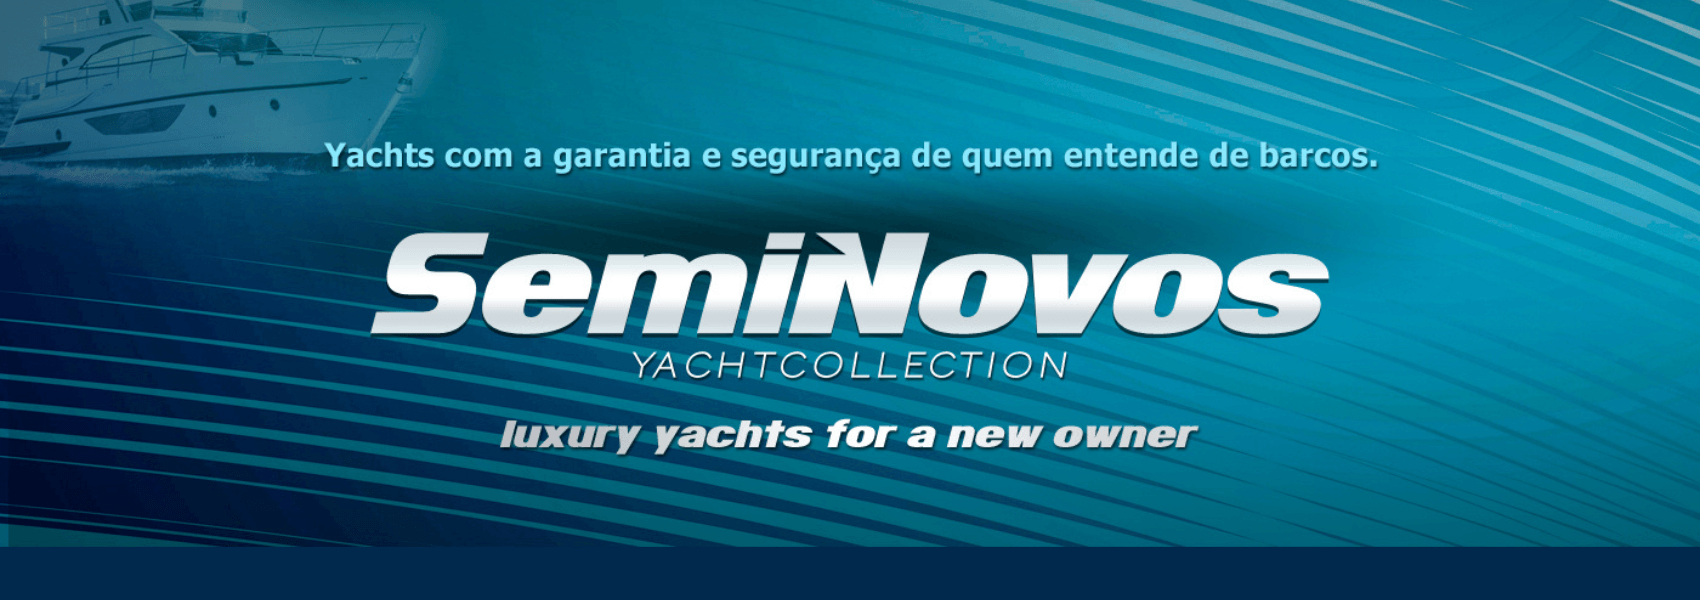 Yachtcollection